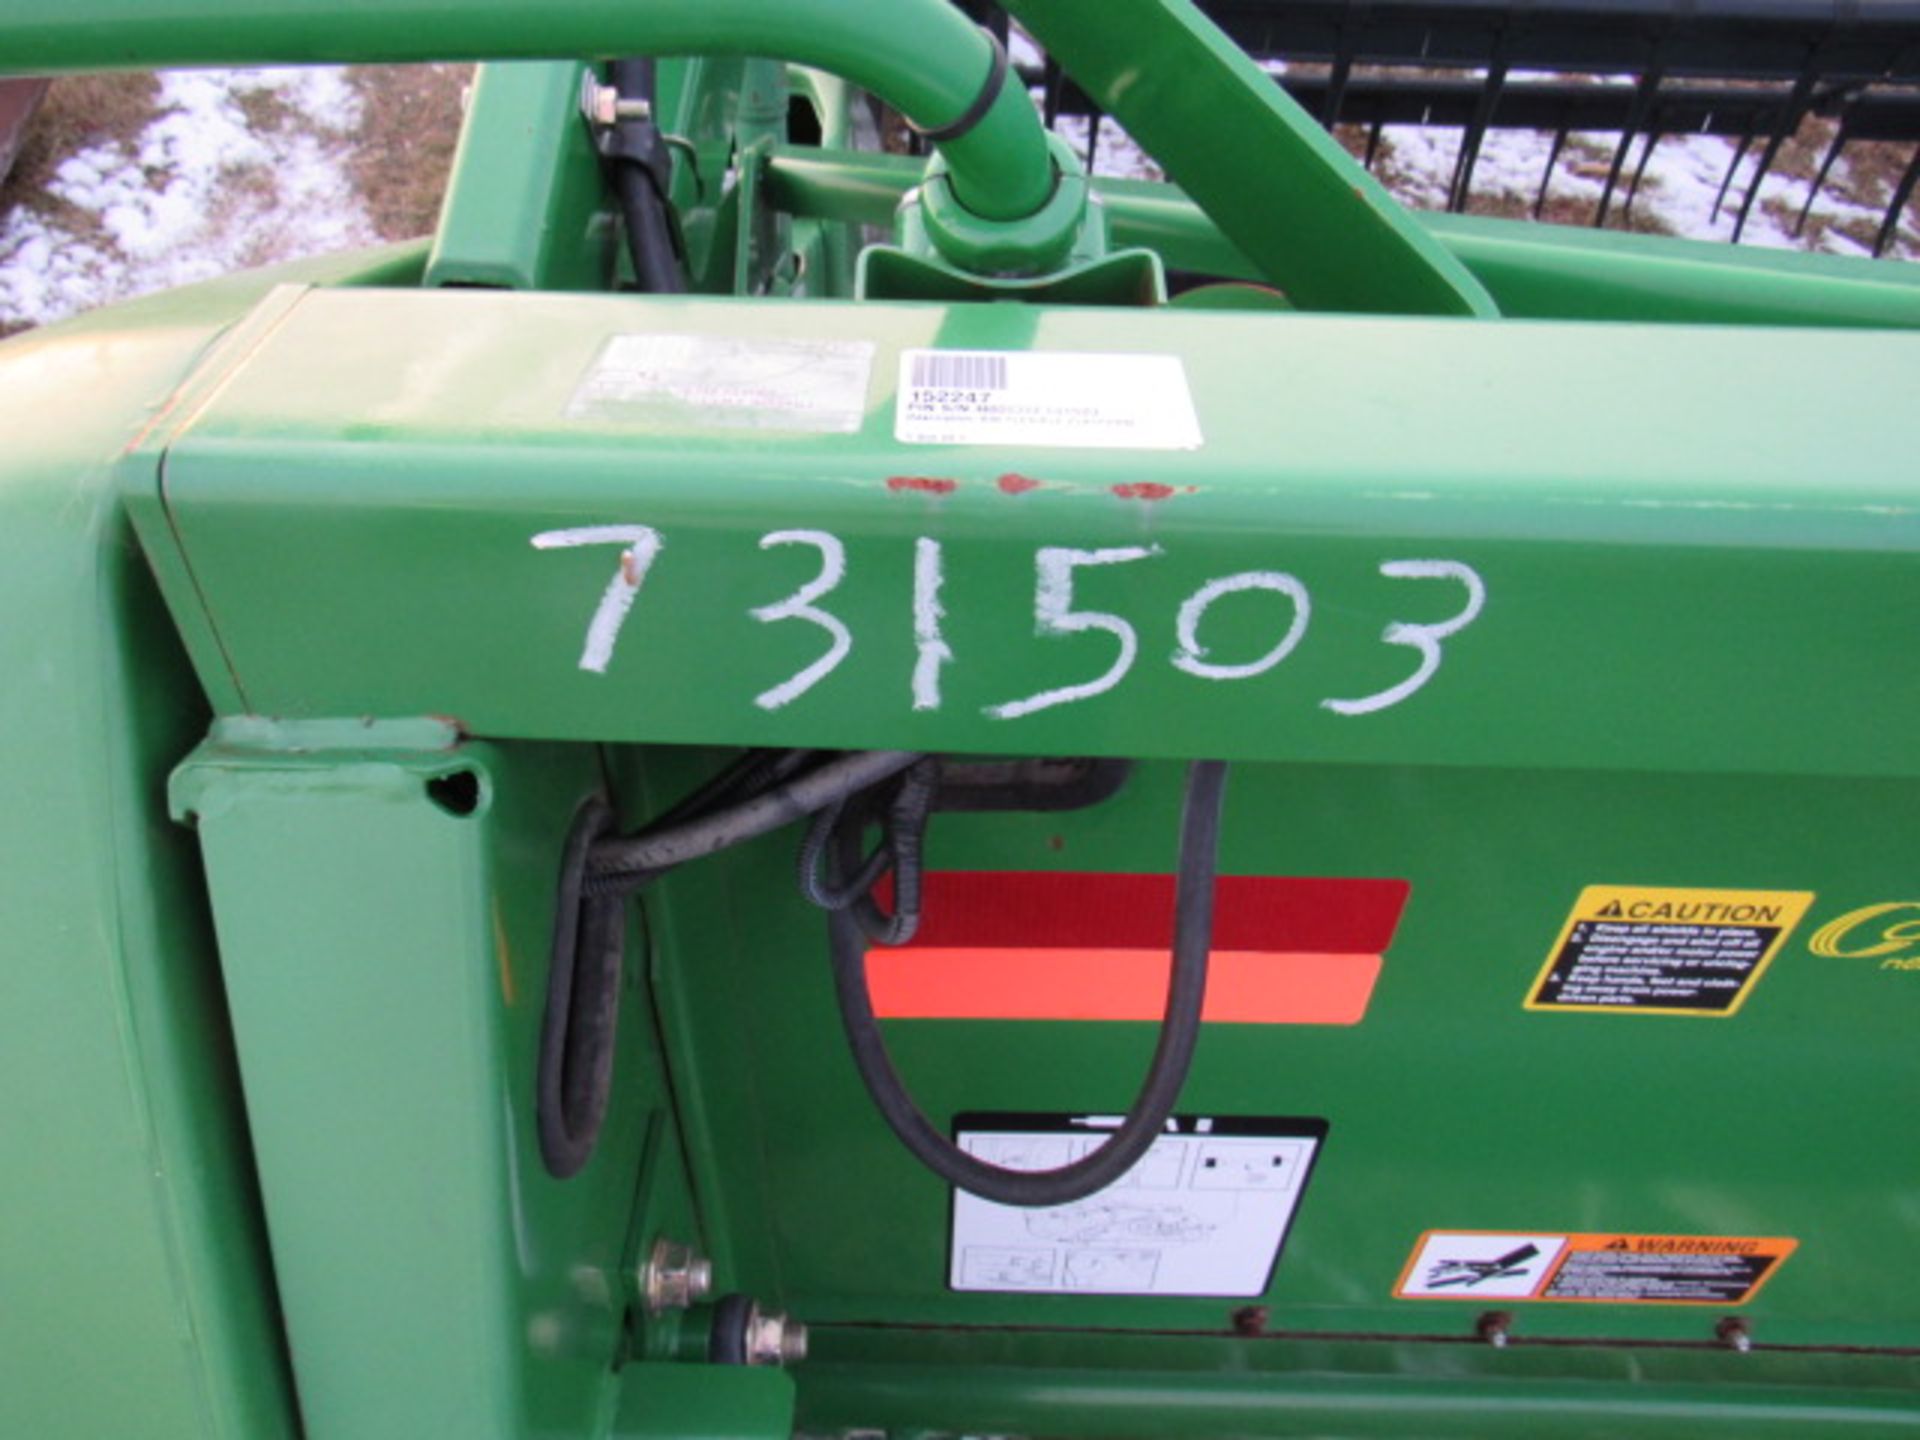 JD 635 - S# 731503 - Image 3 of 3